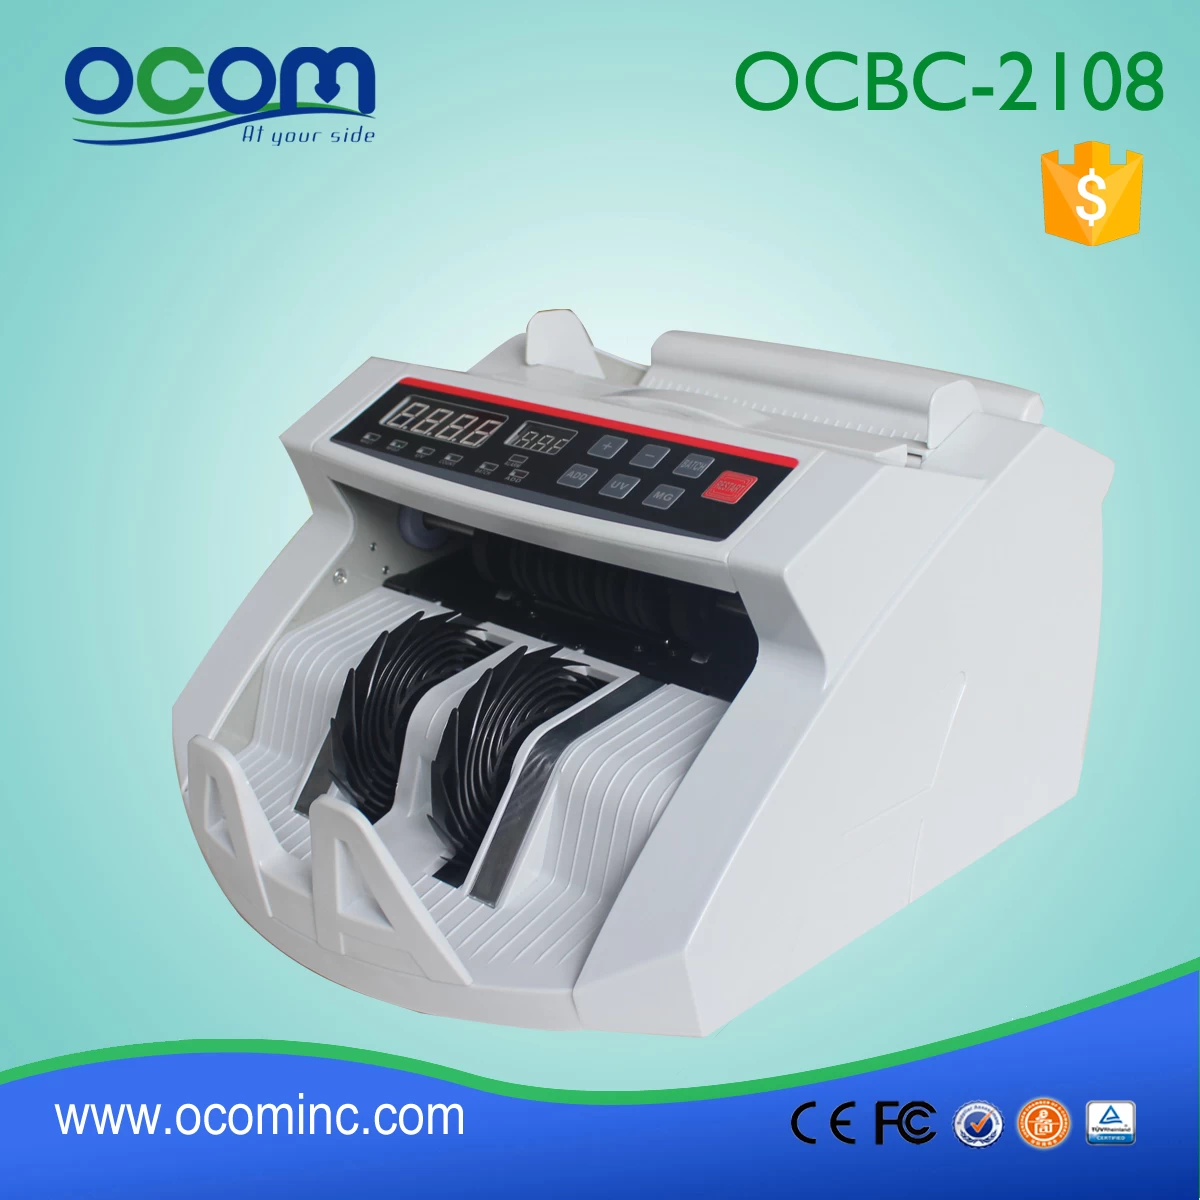 OCBC-2108 Automatic Currency Counting Counter Machine